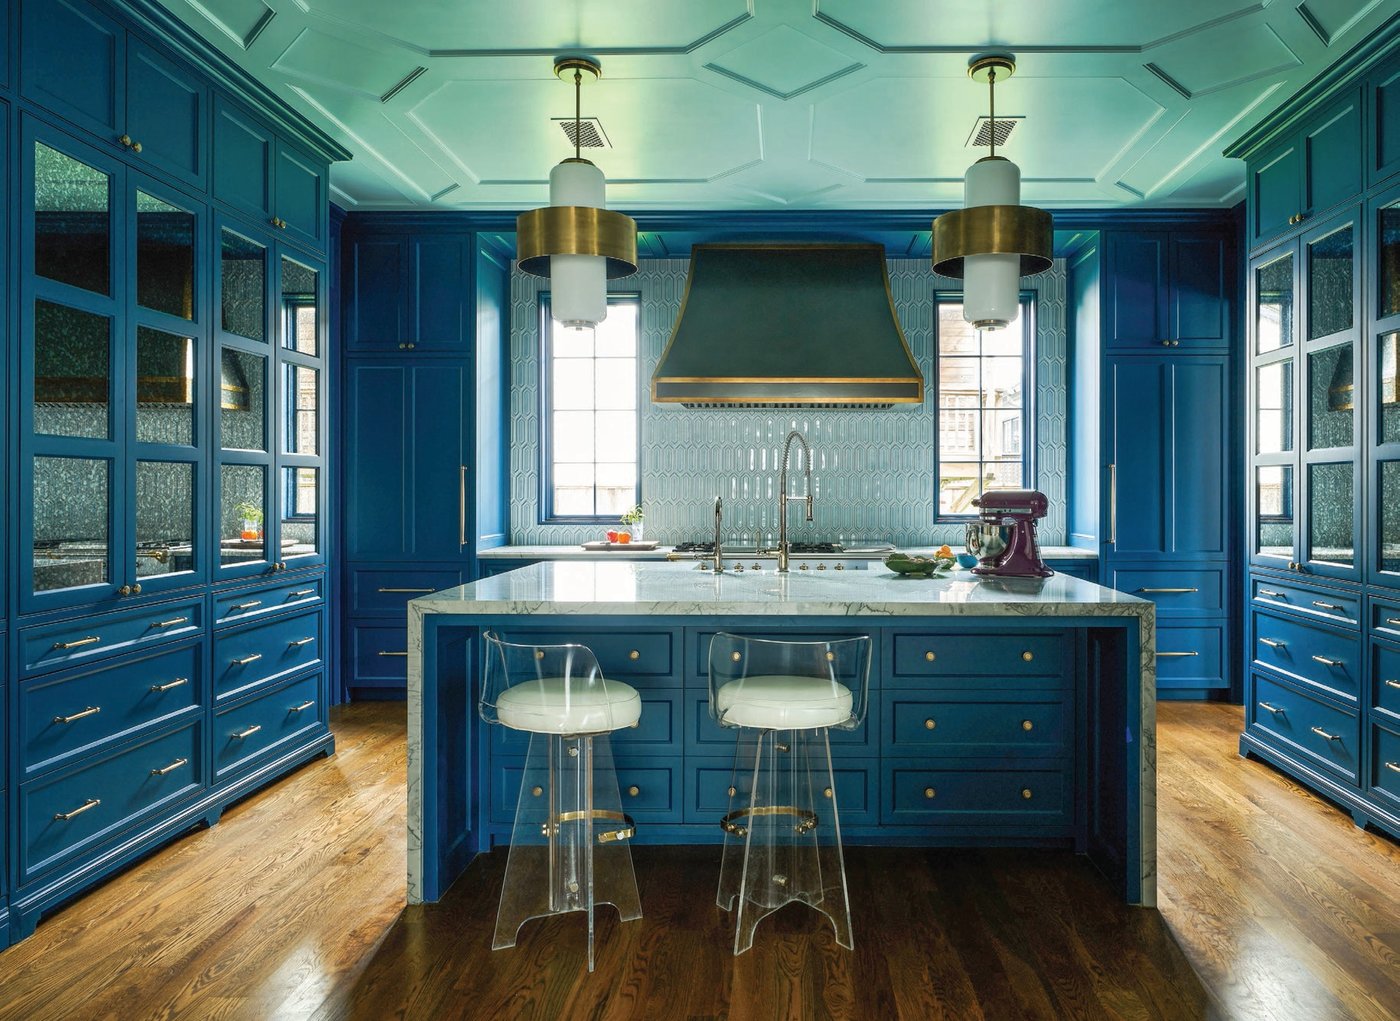 The kitchen offers a cool-hued environment perfect for fun dinners at home PHOTO BY JACK THOMPSON